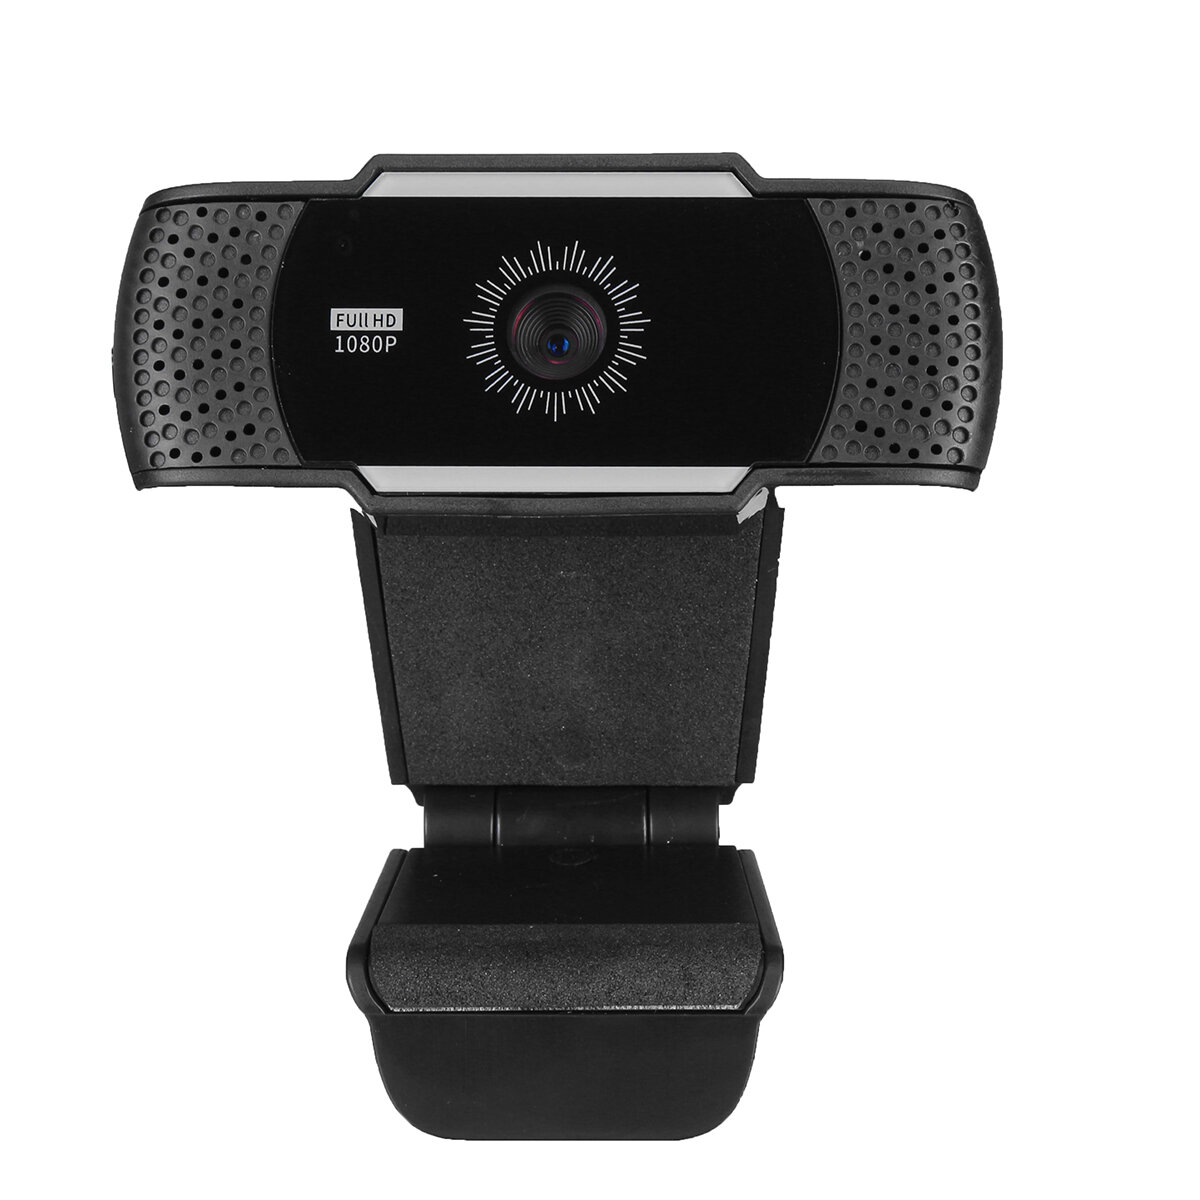 

HR015 1080P HD USB Webcam Conference Live Computer Camera Built-in Noise Reduction Microphone for PC Laptop